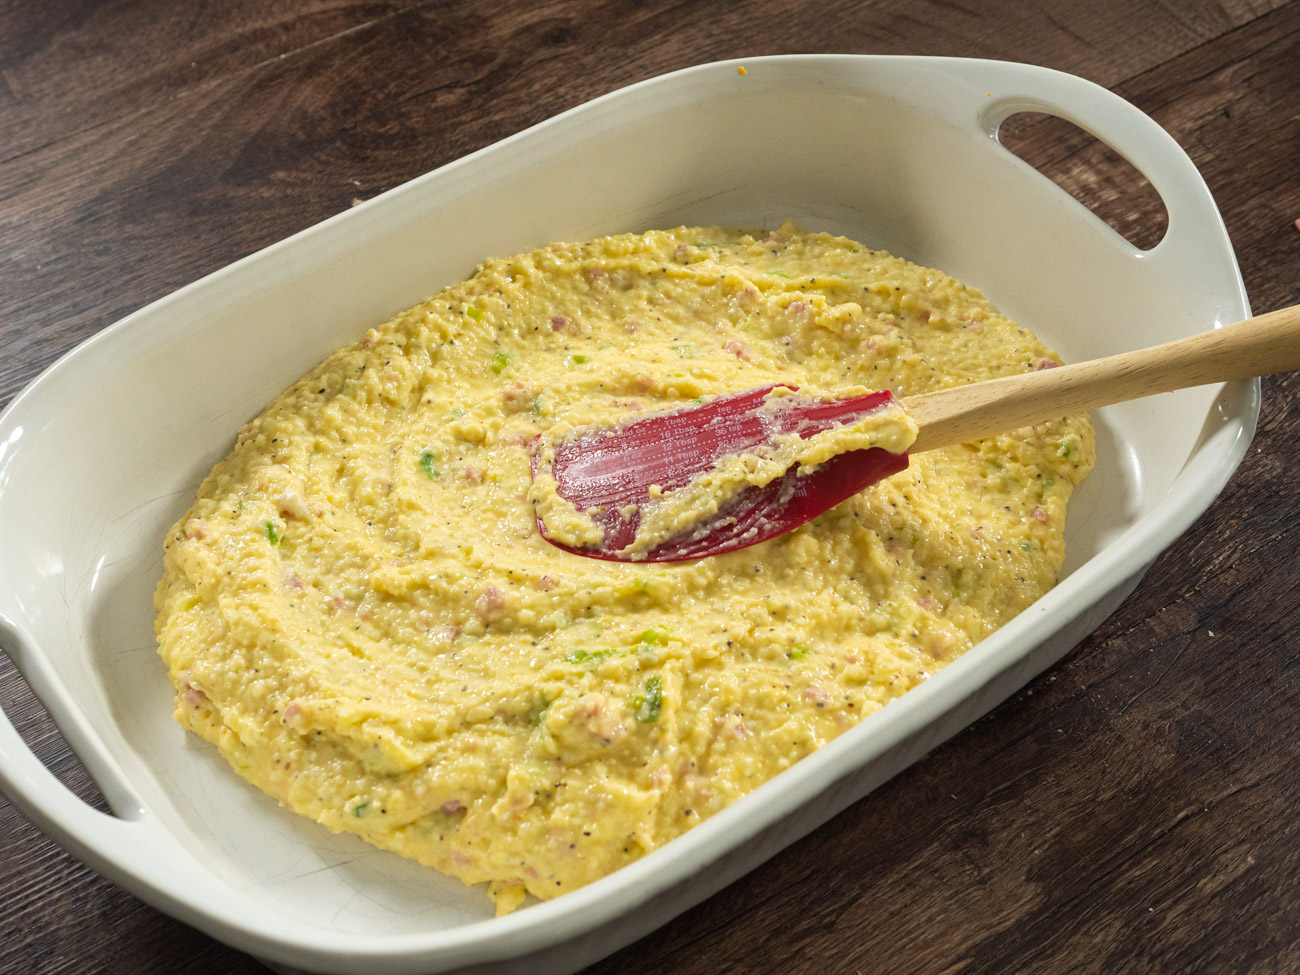 Transfer grits mixture to a casserole dish and refrigerate for at least 3 hours (and up to overnight).